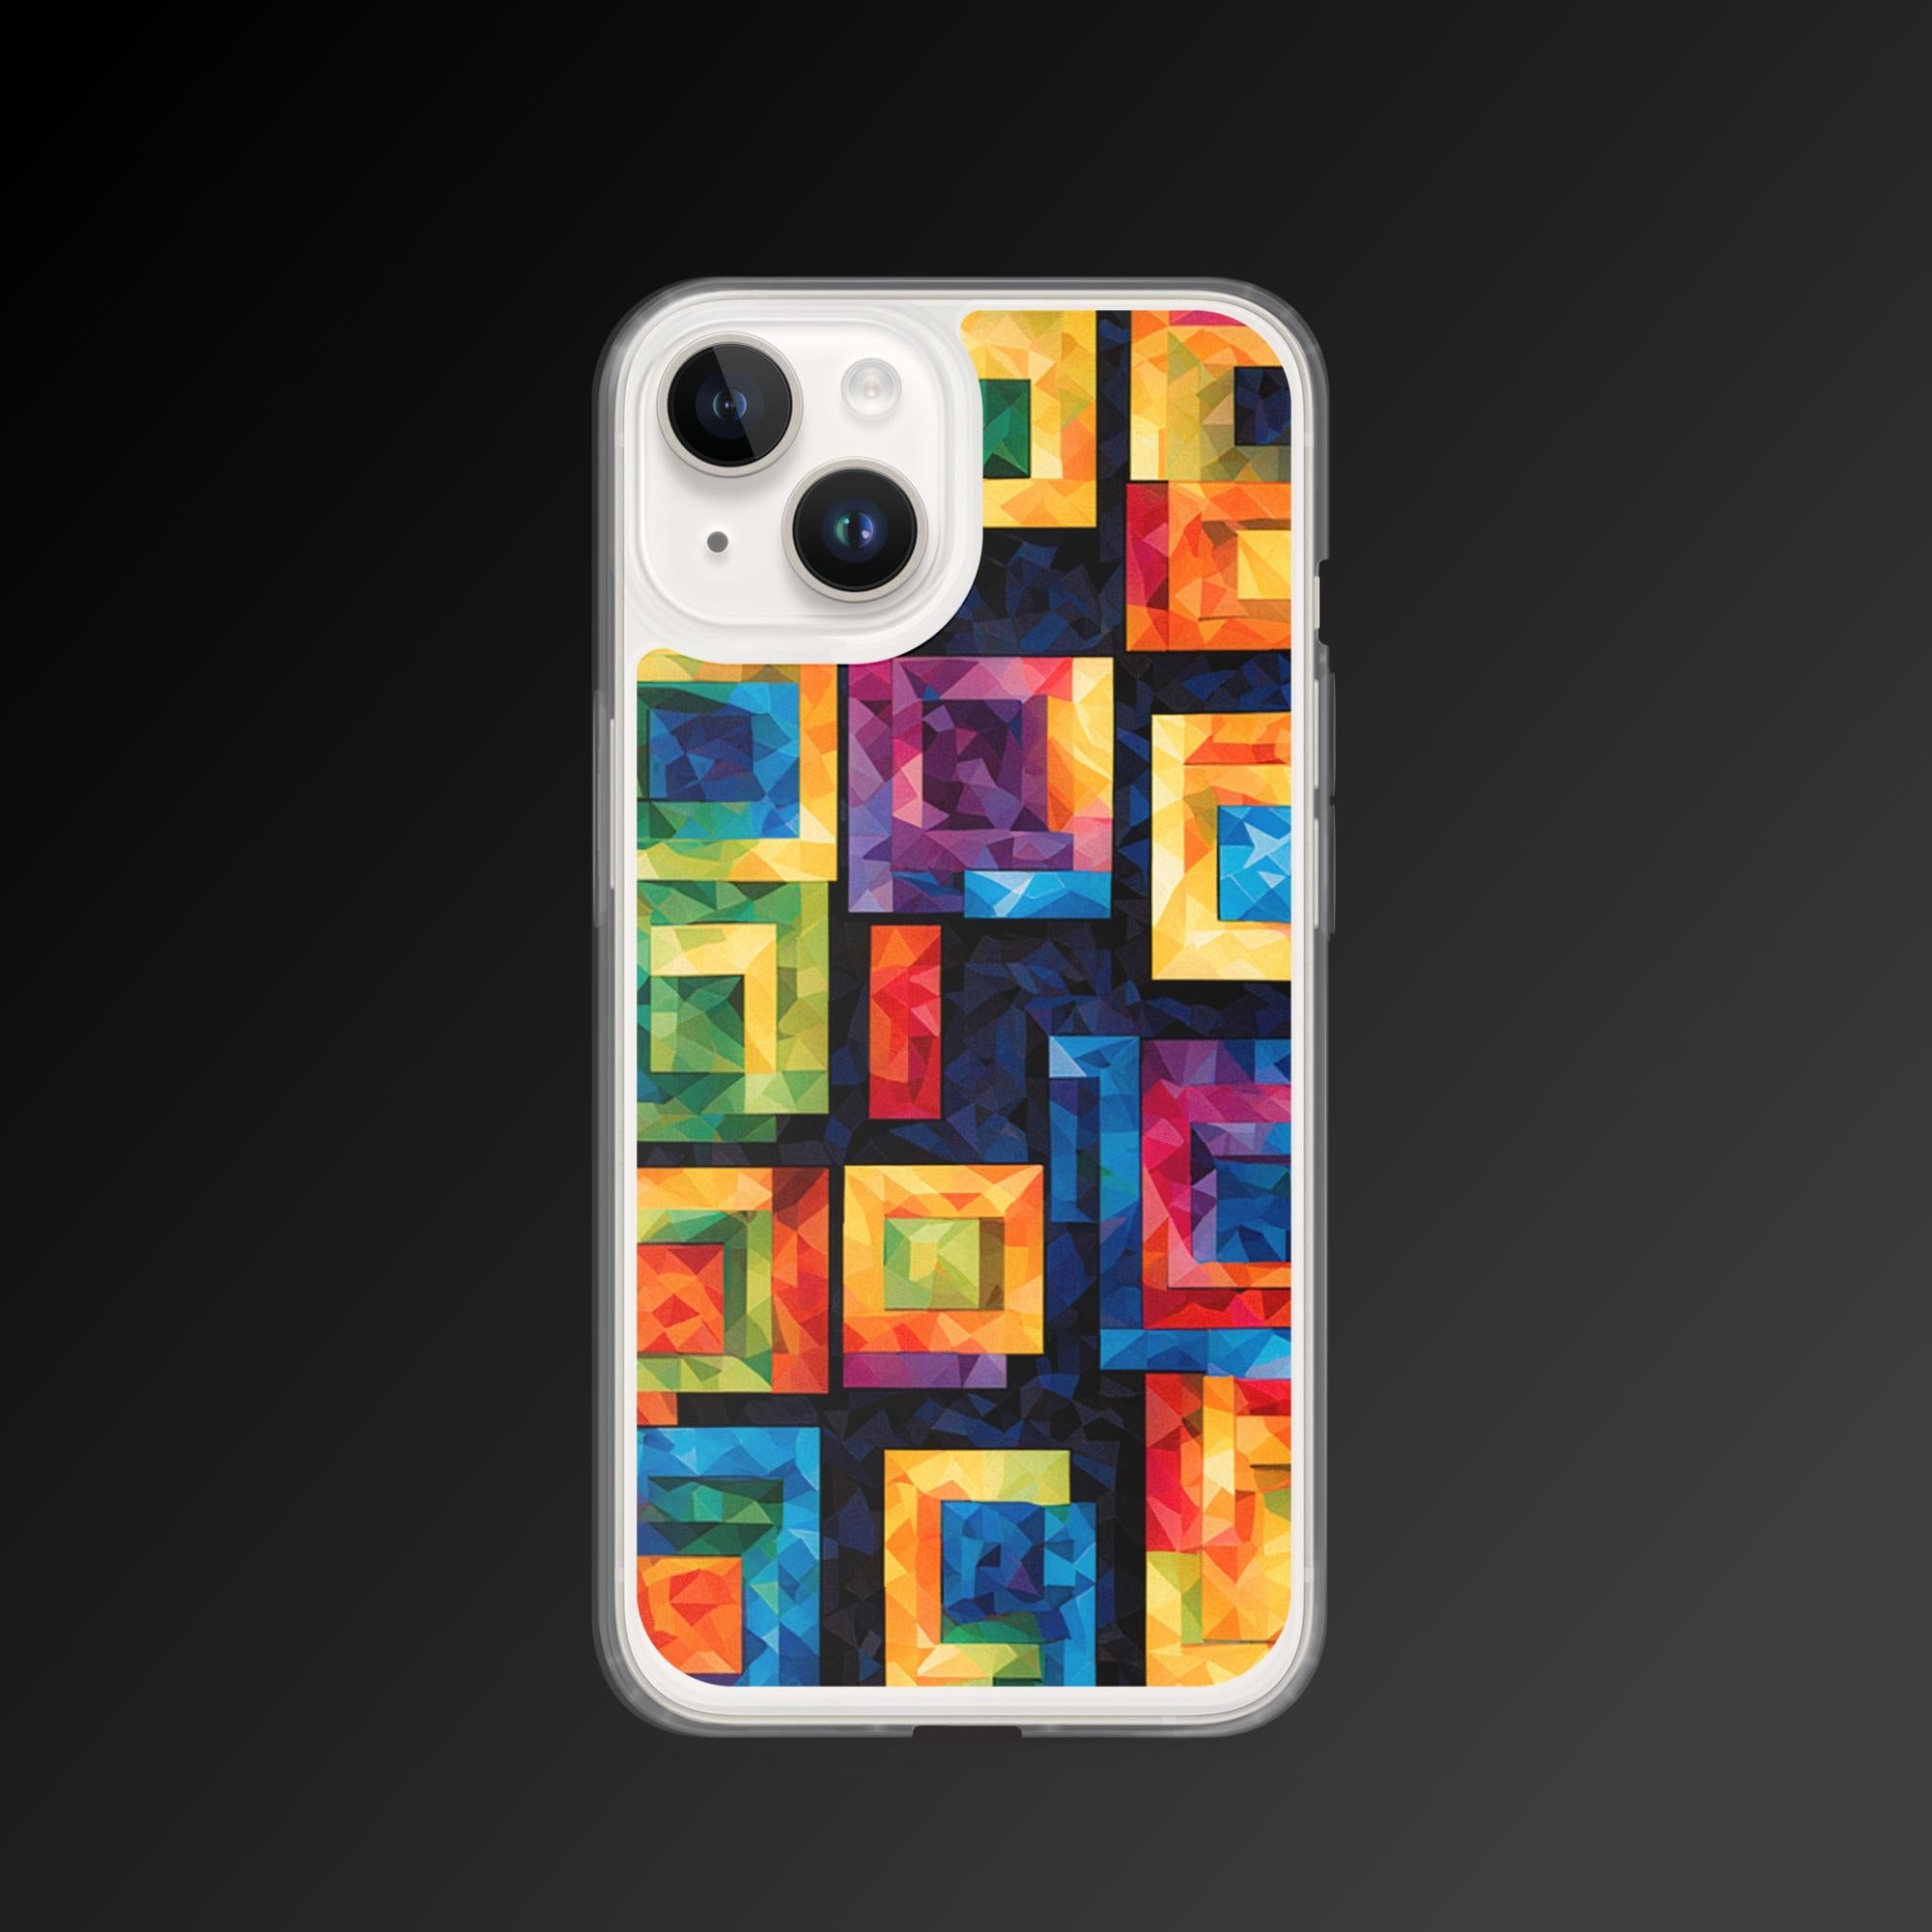 "Many forms" clear iphone case - Clear iphone case - Ever colorful